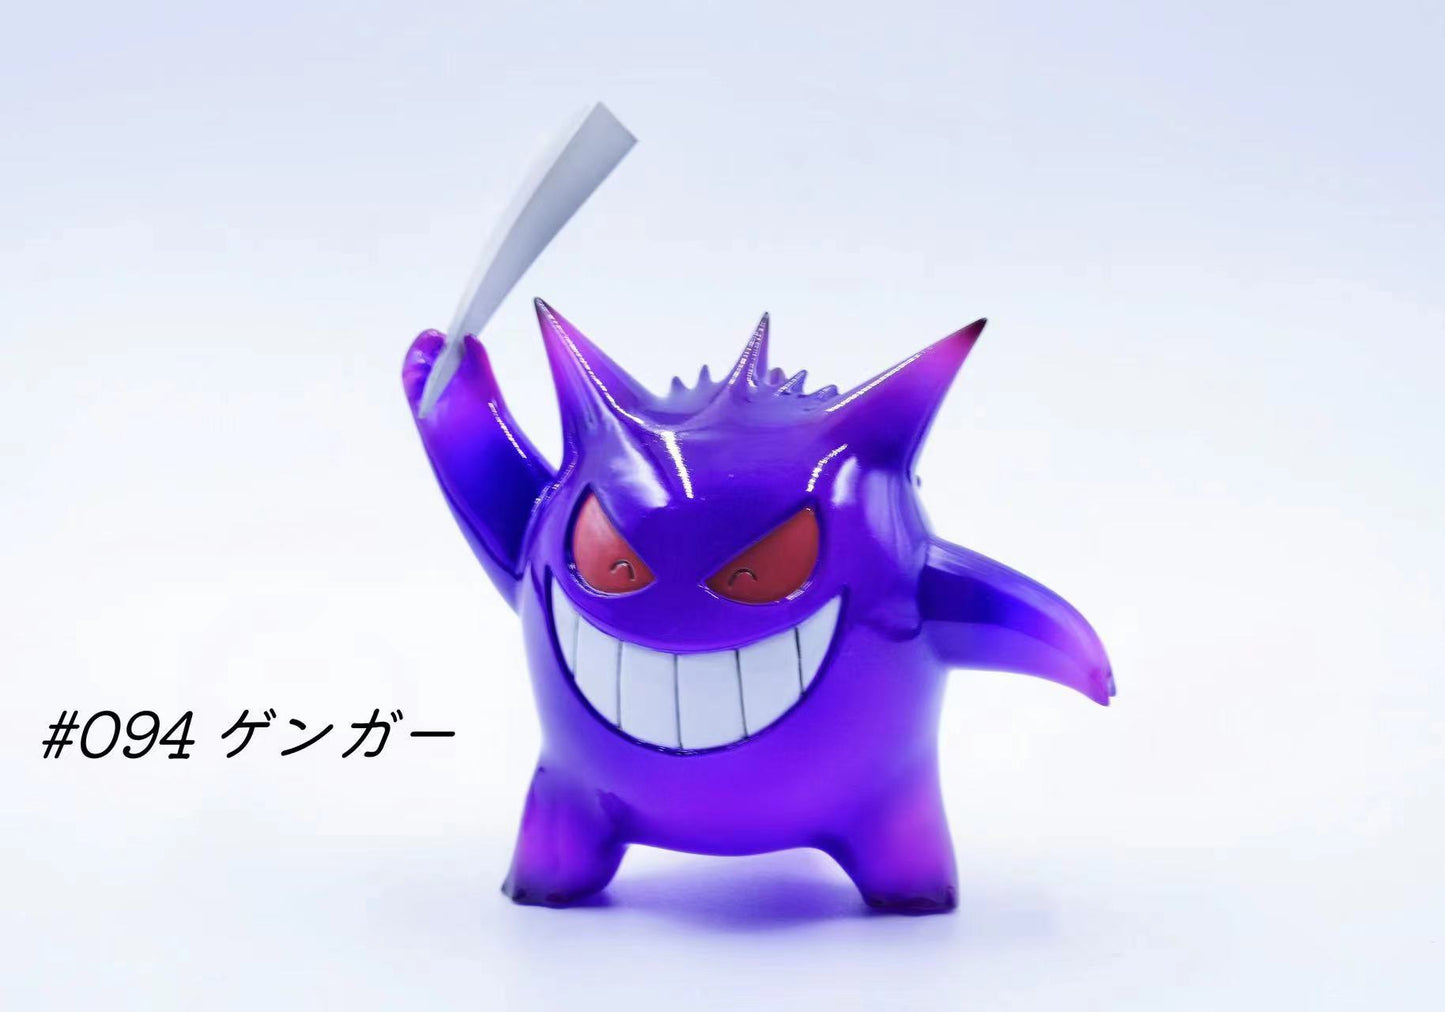 [IN STOCK] 1/20 Scale World Figure [55] - Smiling Gengar